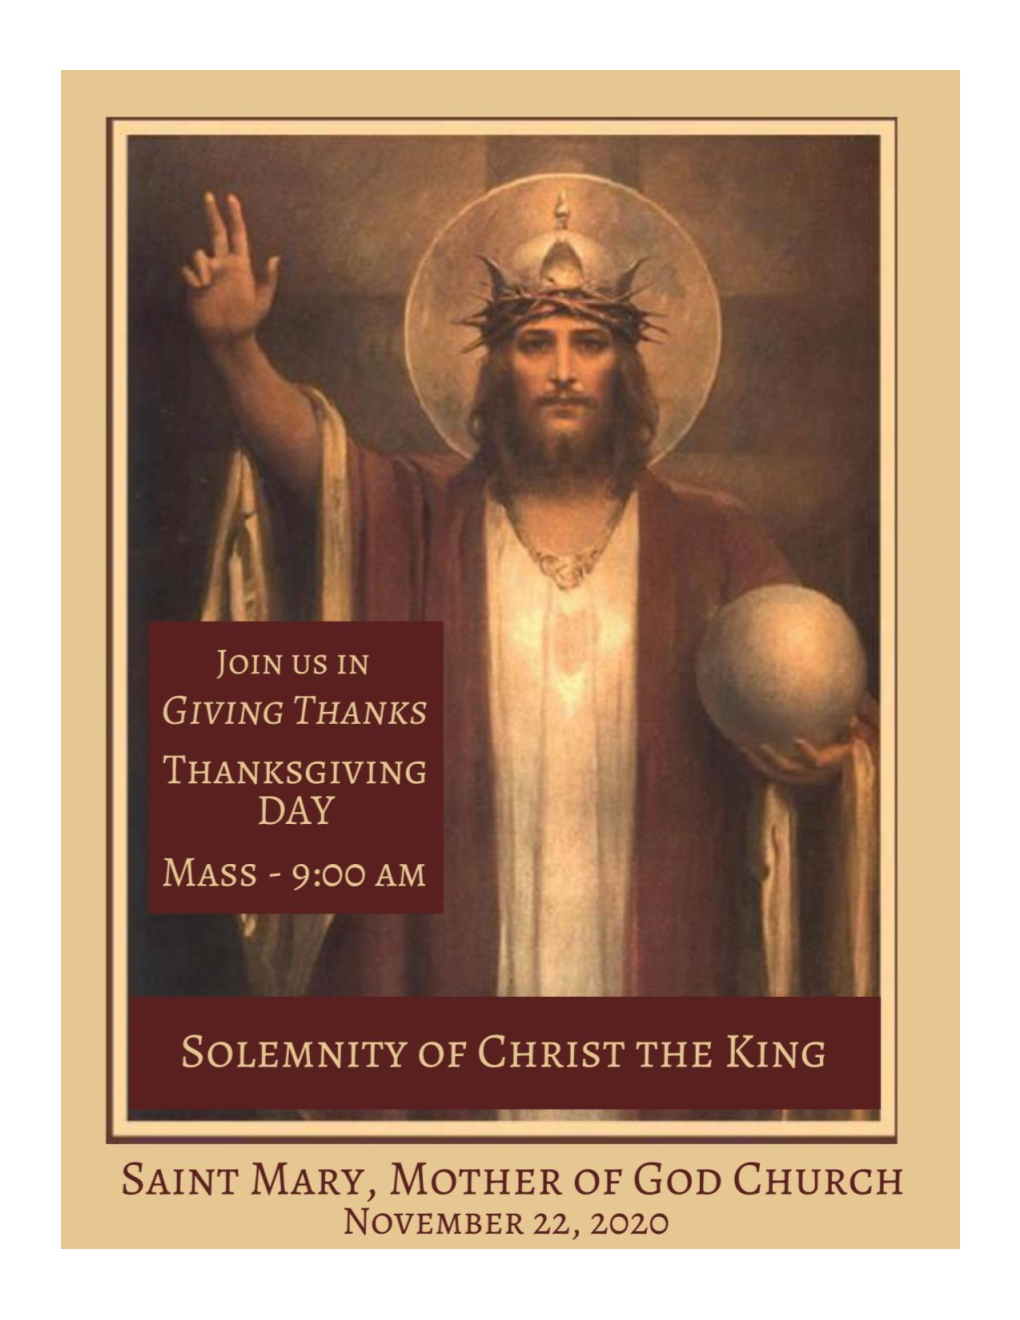 Pope Francis: Solemnity of Christ the King